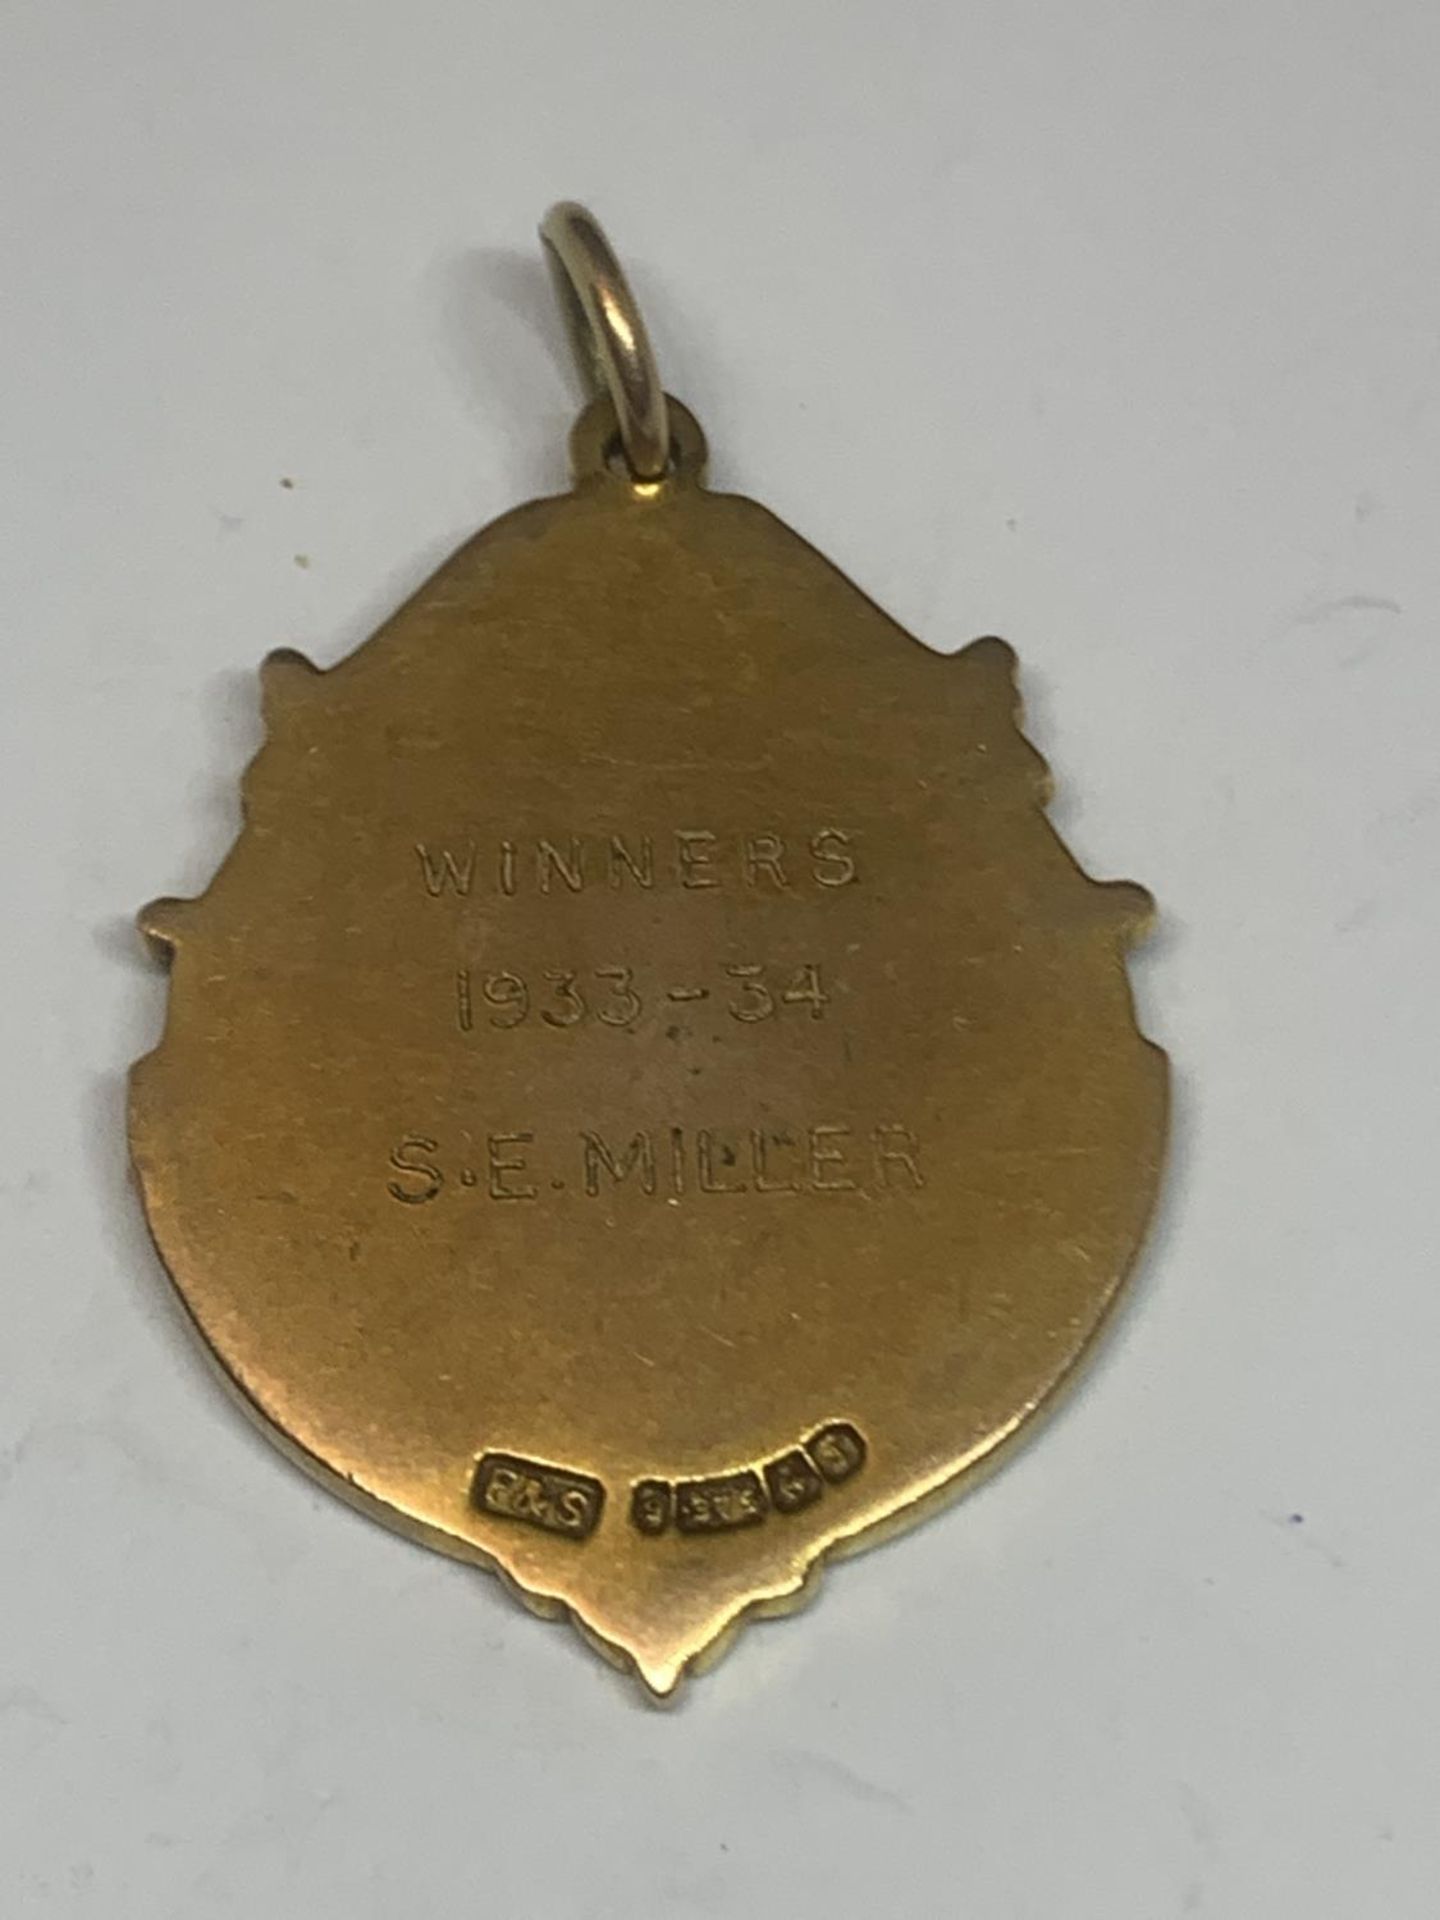 A HALLMARKED 9 CARAT GOLD LANCASHIRE RUGBY LEAGUE MEDAL ENGRAVED WINNERS 1933-34 S. E. MILLER - Image 2 of 5